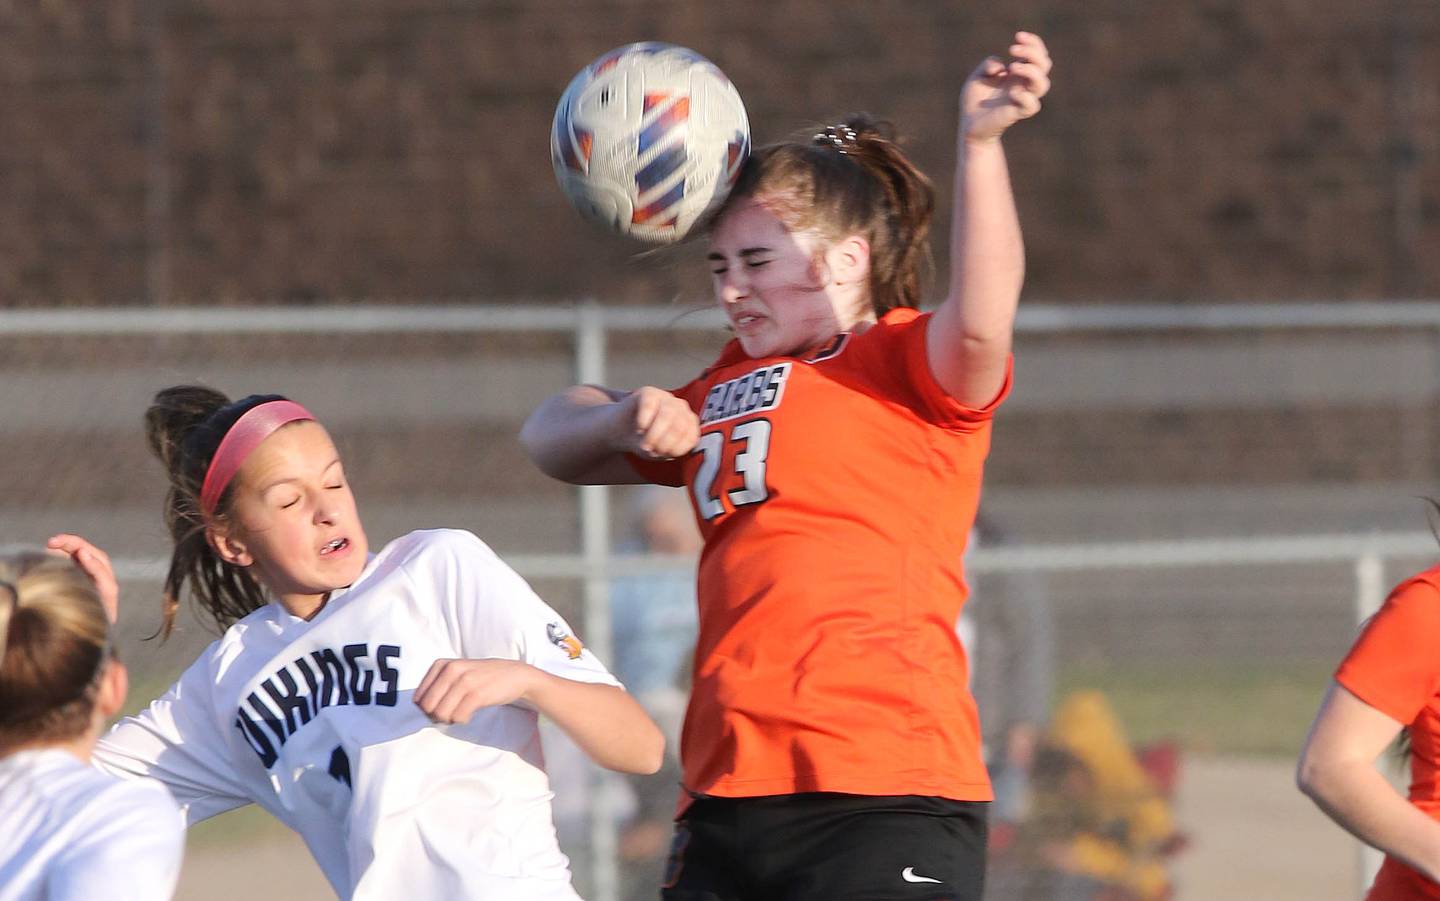 DeKalb's Addison Elshoff heads the ball past Guilford's Berkeley Stenstrom during their game Monday, April 10, 2023, at DeKalb High School.